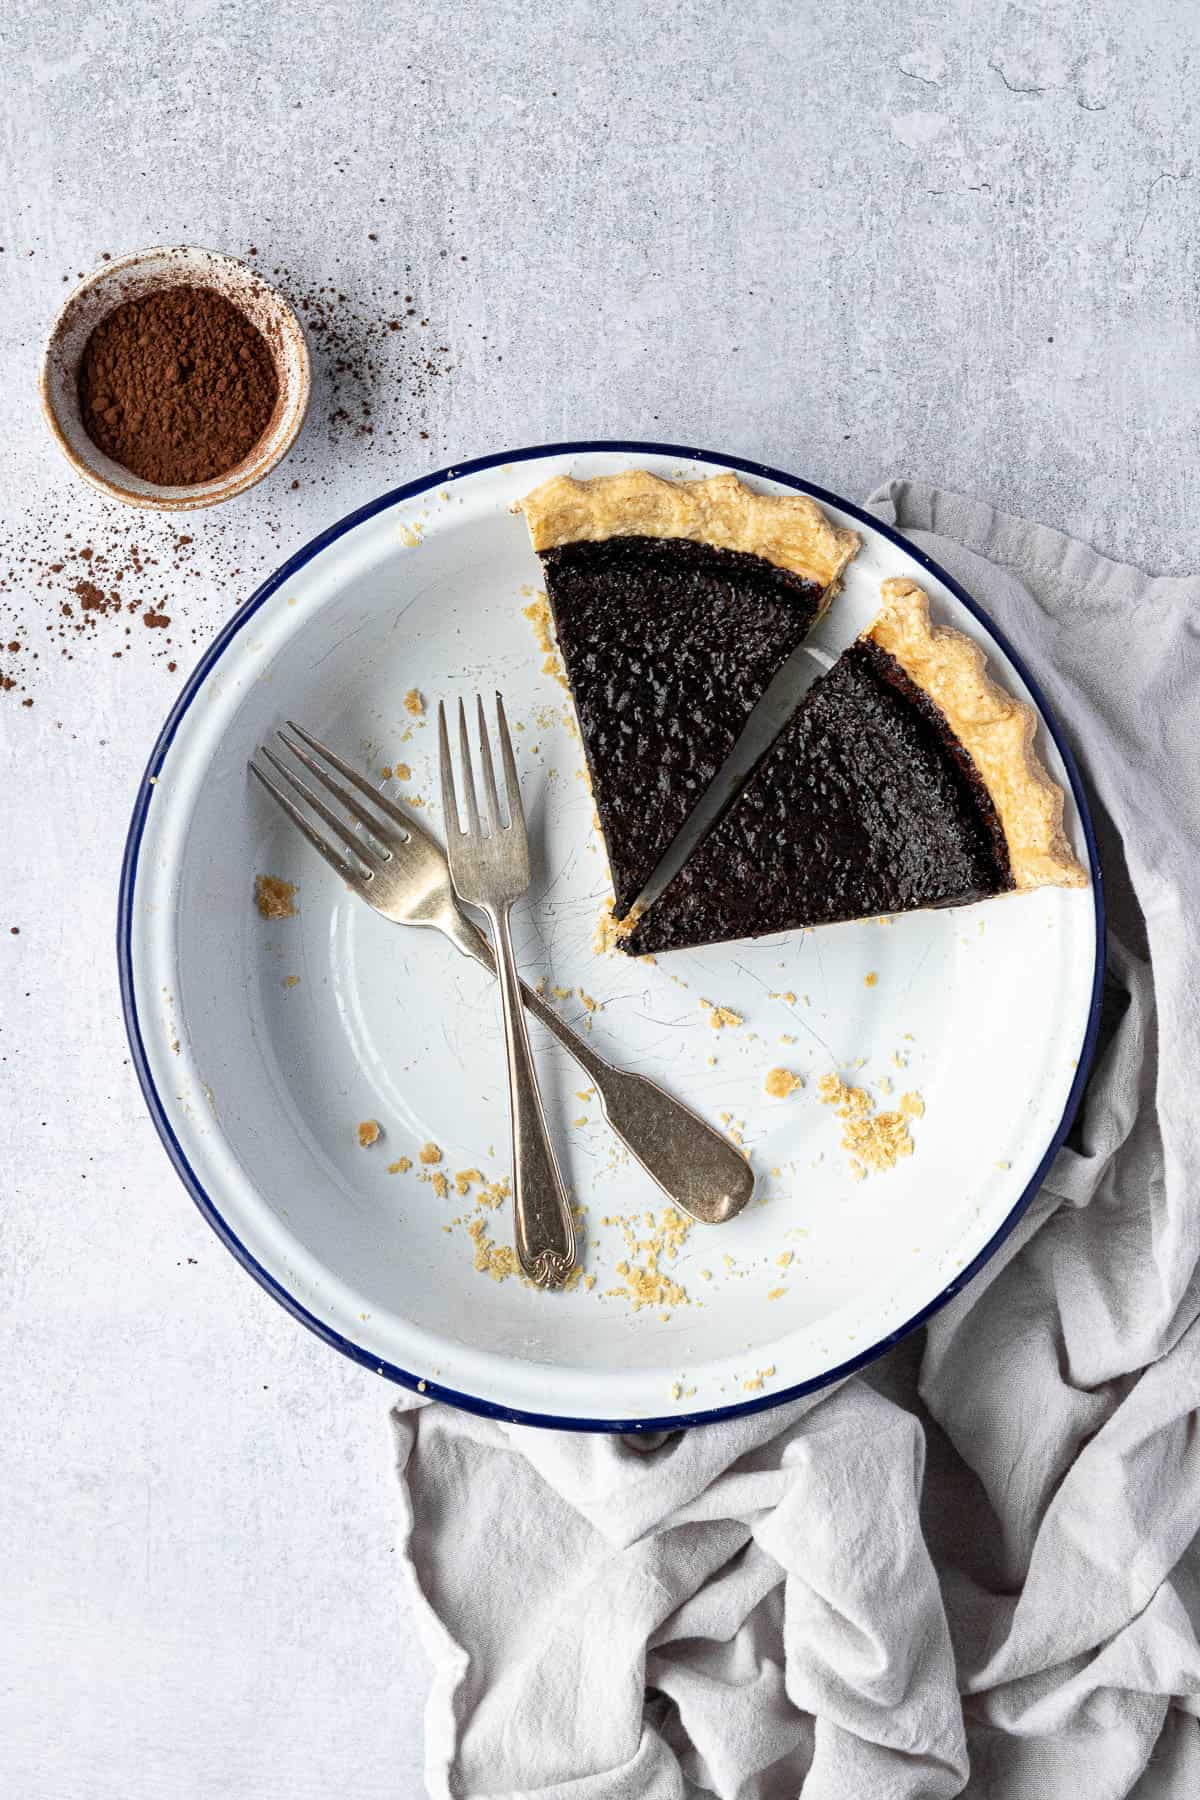 Two slices of vegan chocolate chess pie in a white pie dish with two forks.